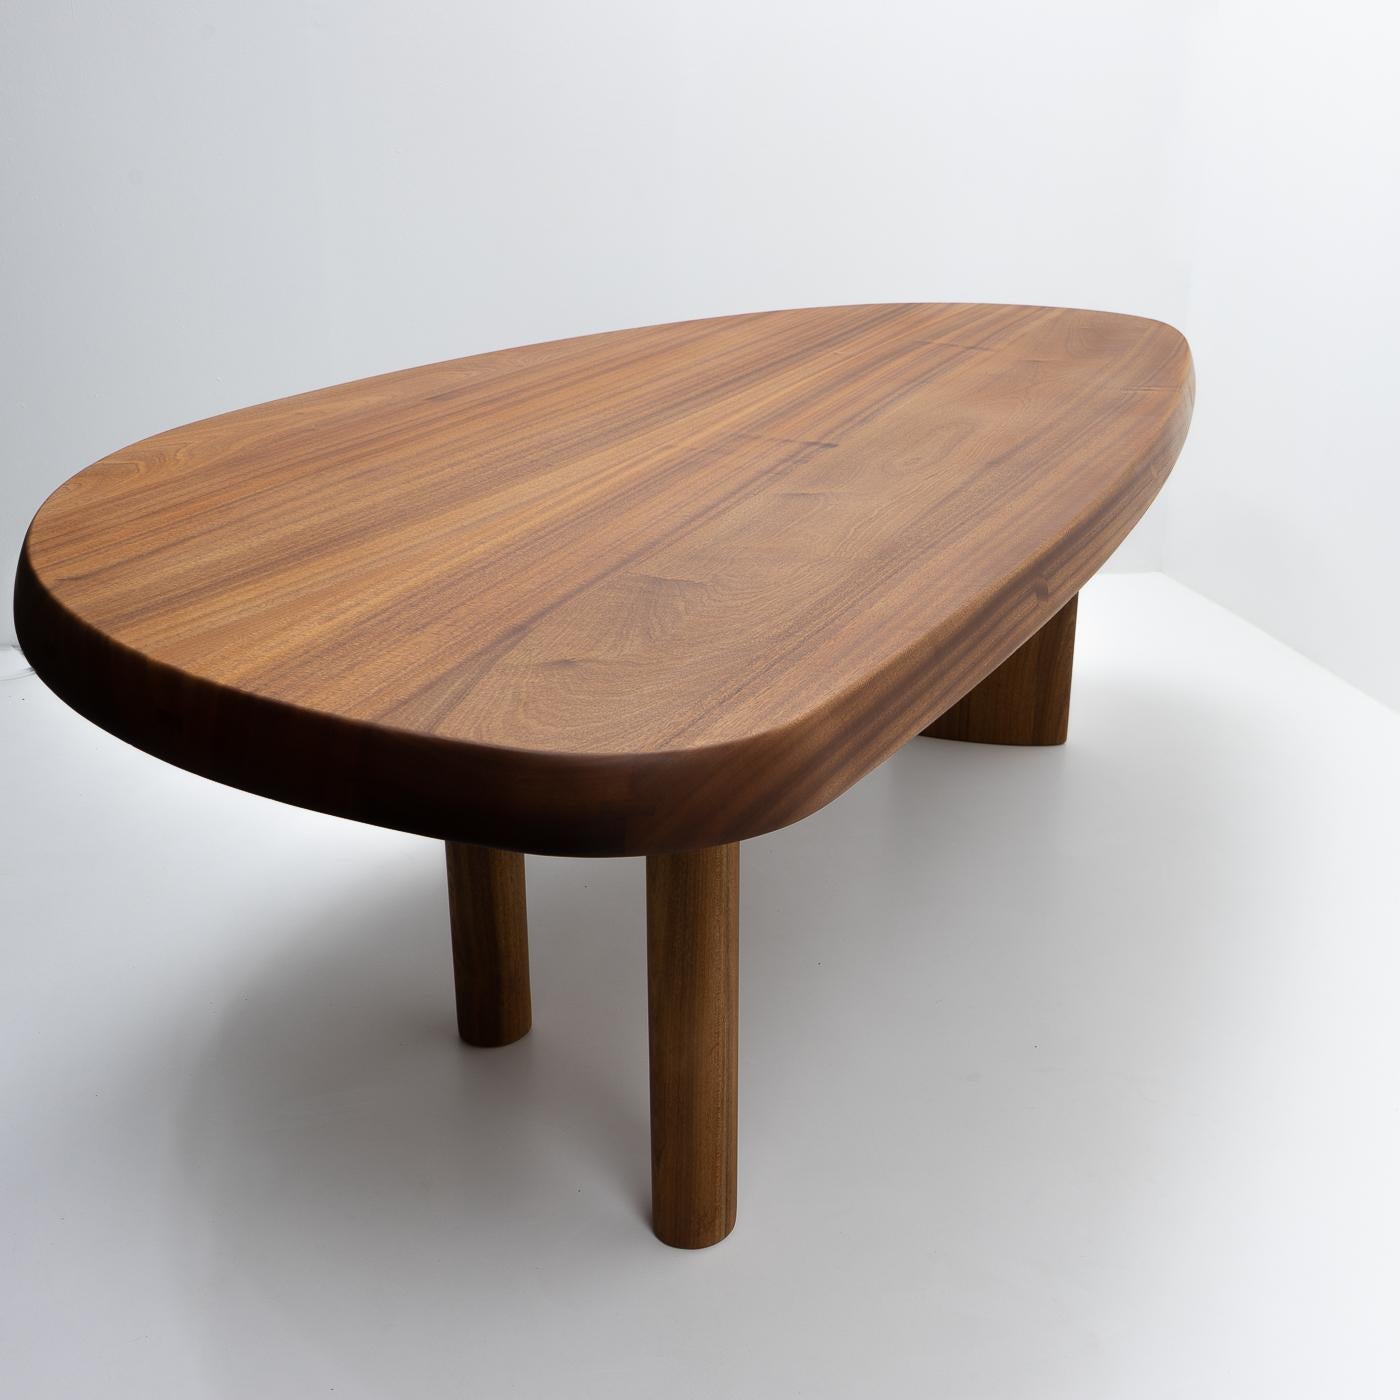 20th Century Modernist Design Free Form Dining Table by Charlotte Perriand, Cassina, 2000s